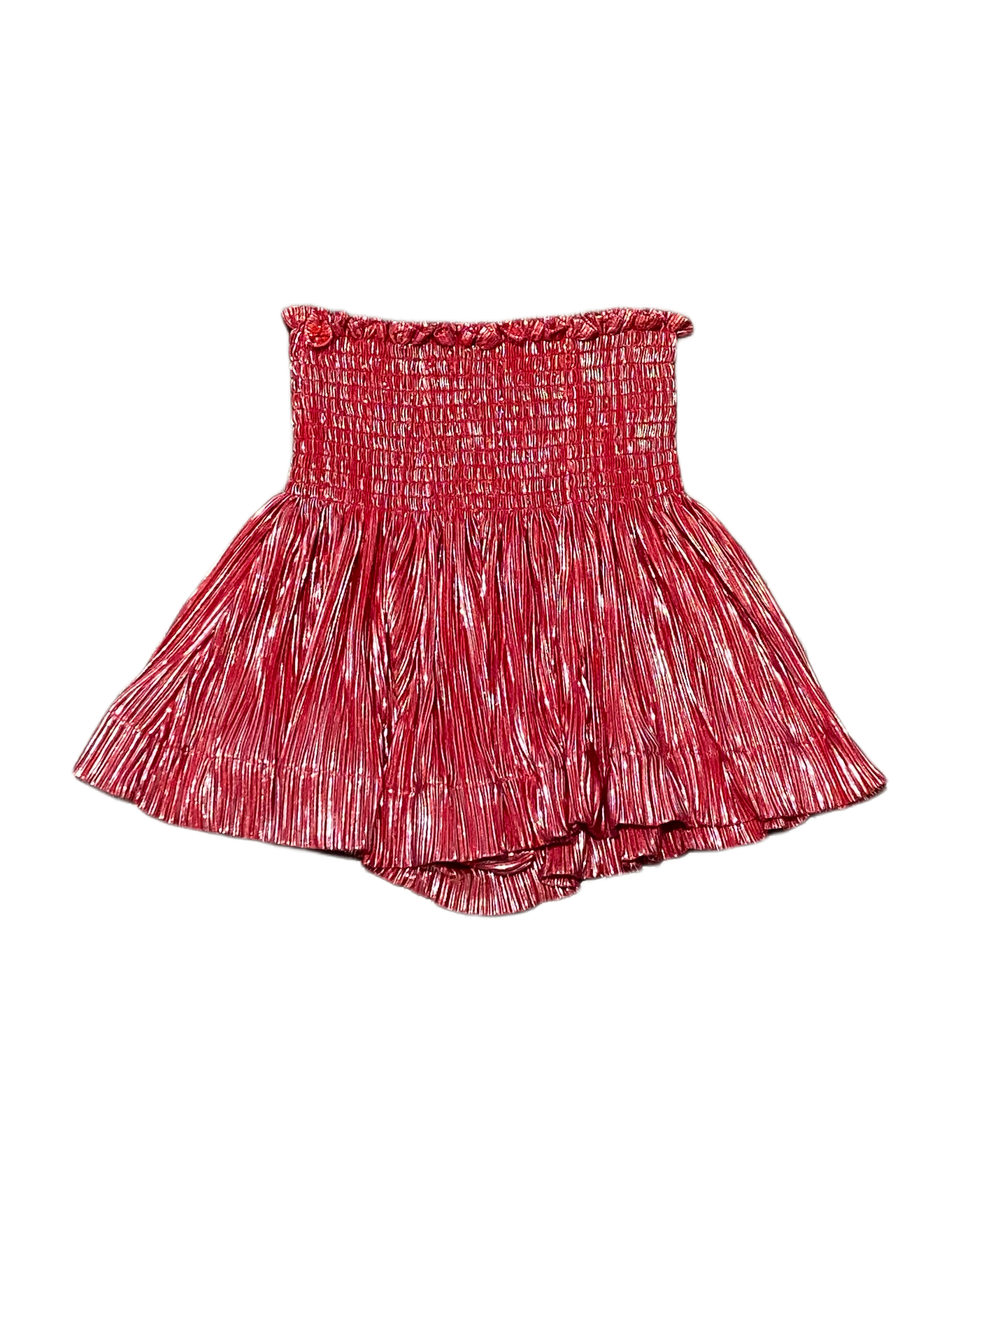 Youth Red/Silver Pleat Swing Shorts